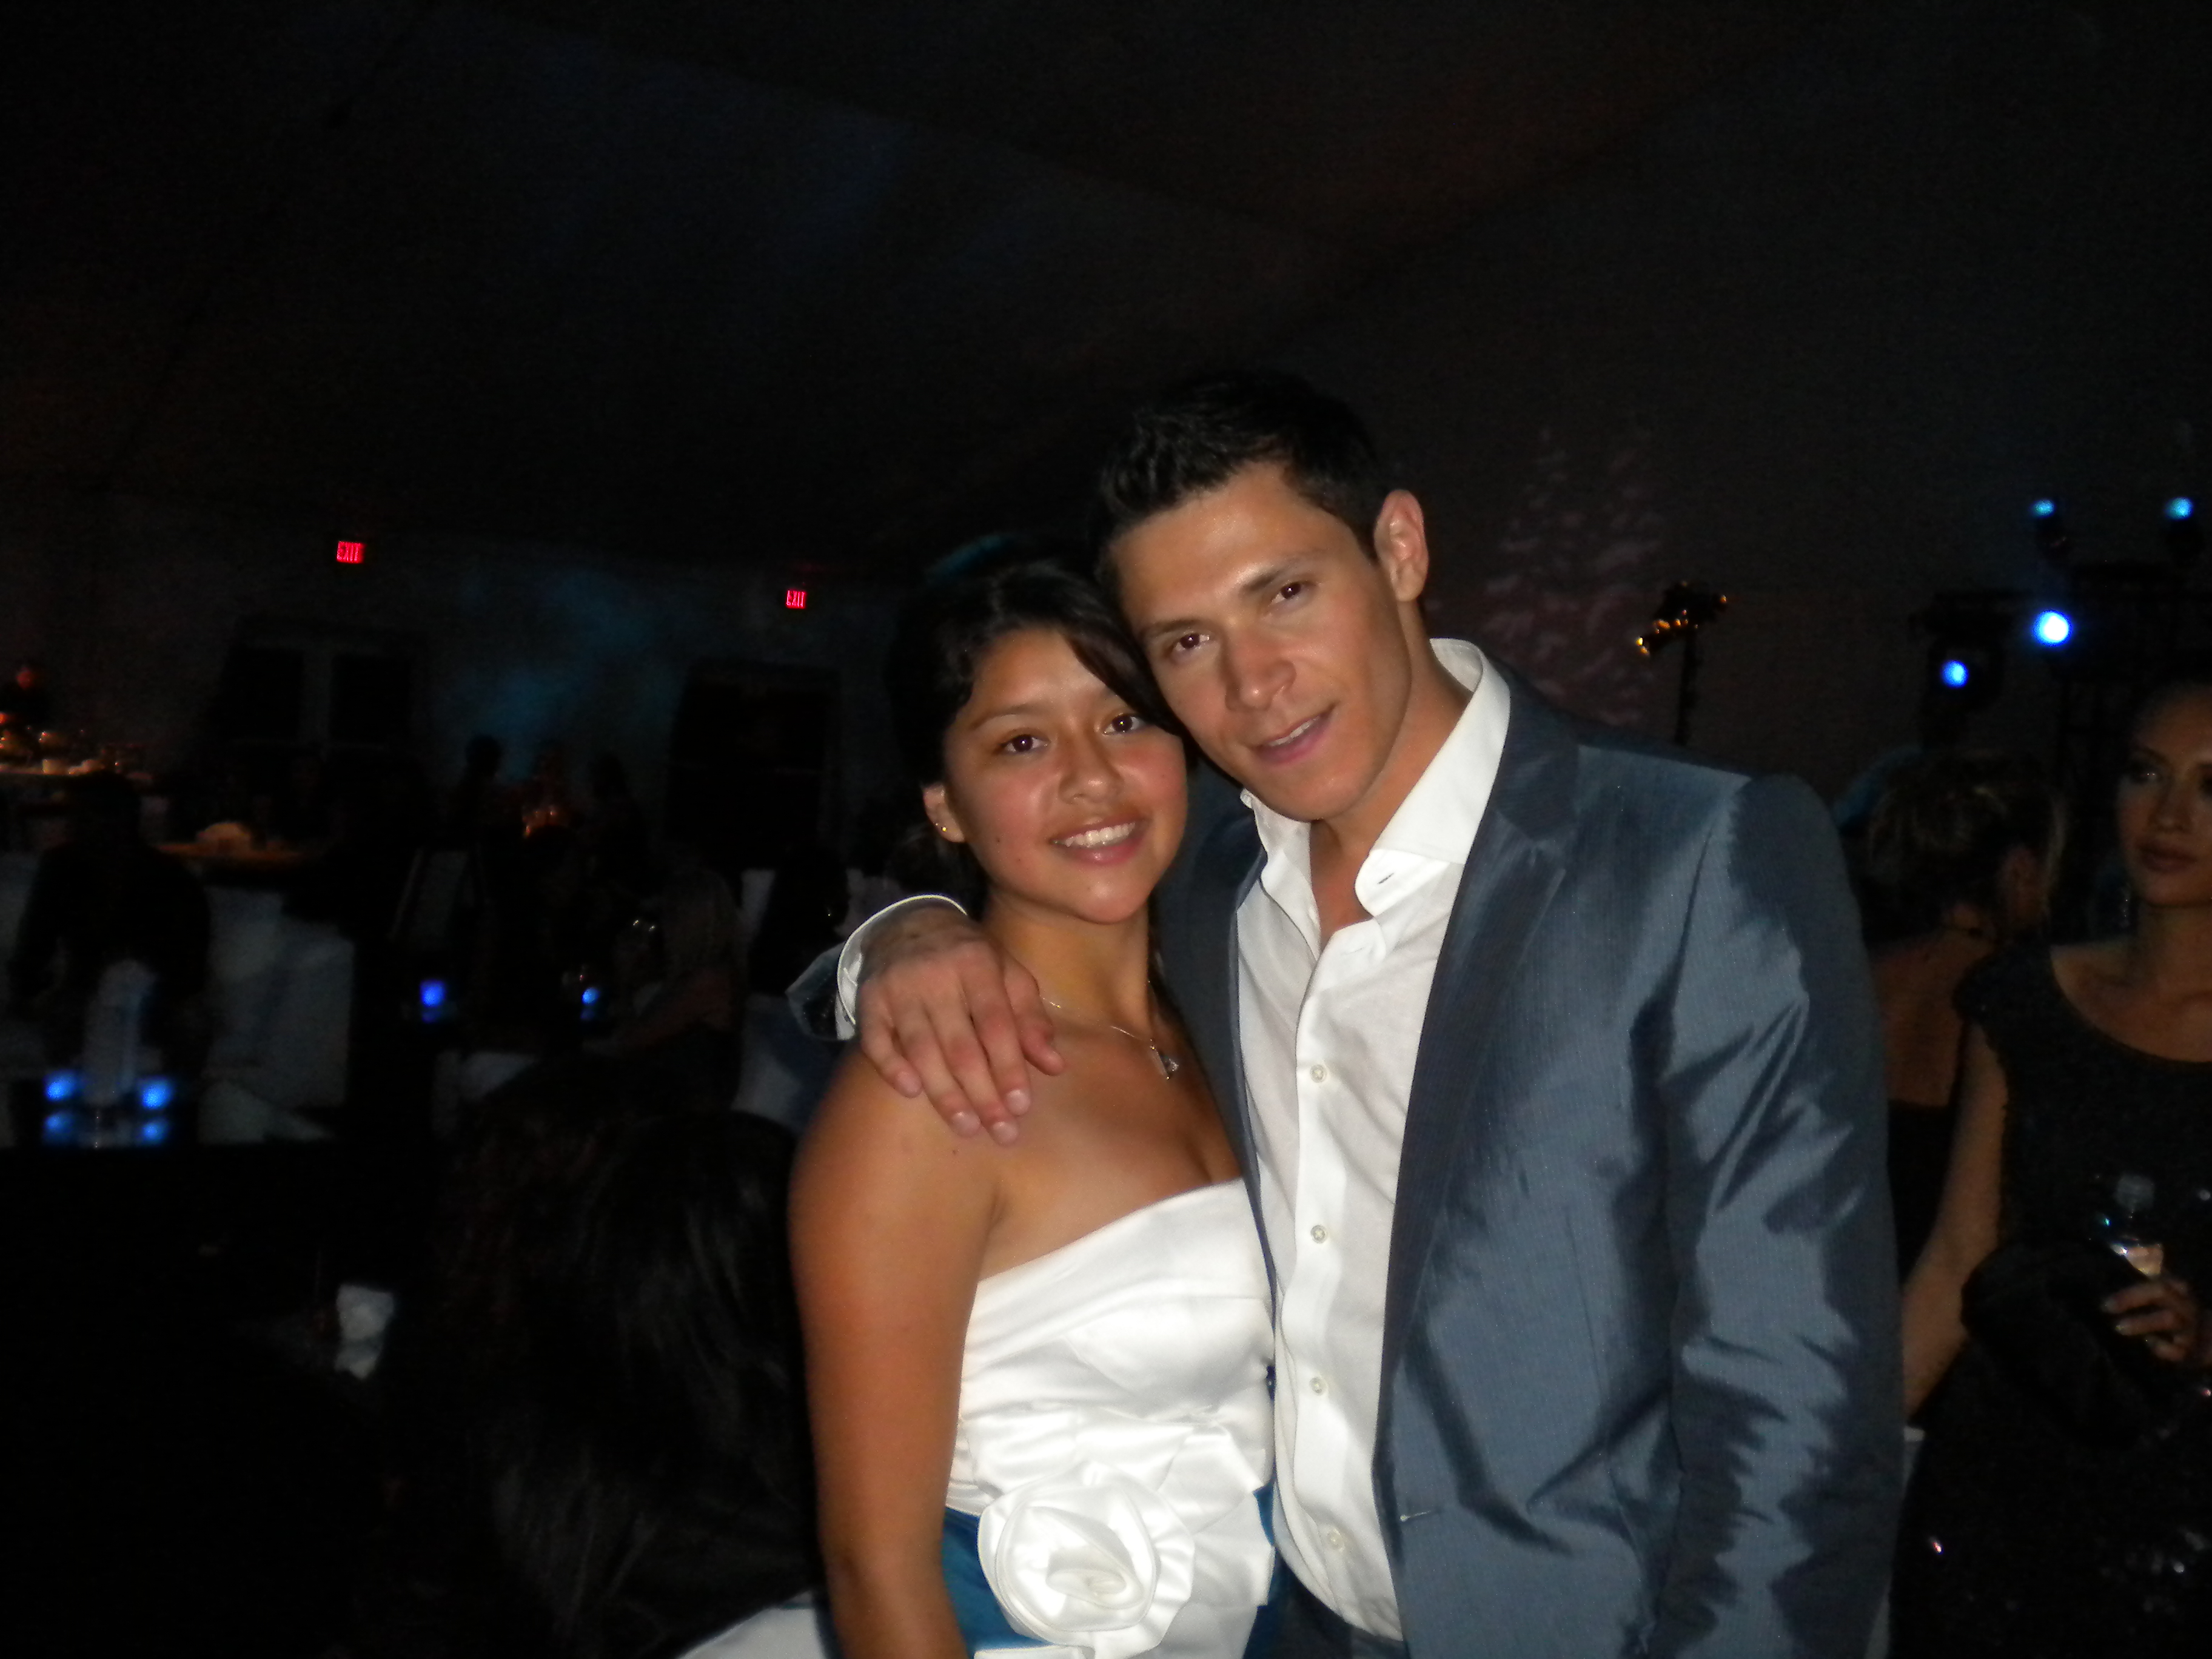 Chelsea and Alex Meraz at the Eclipse Premeiere After Party